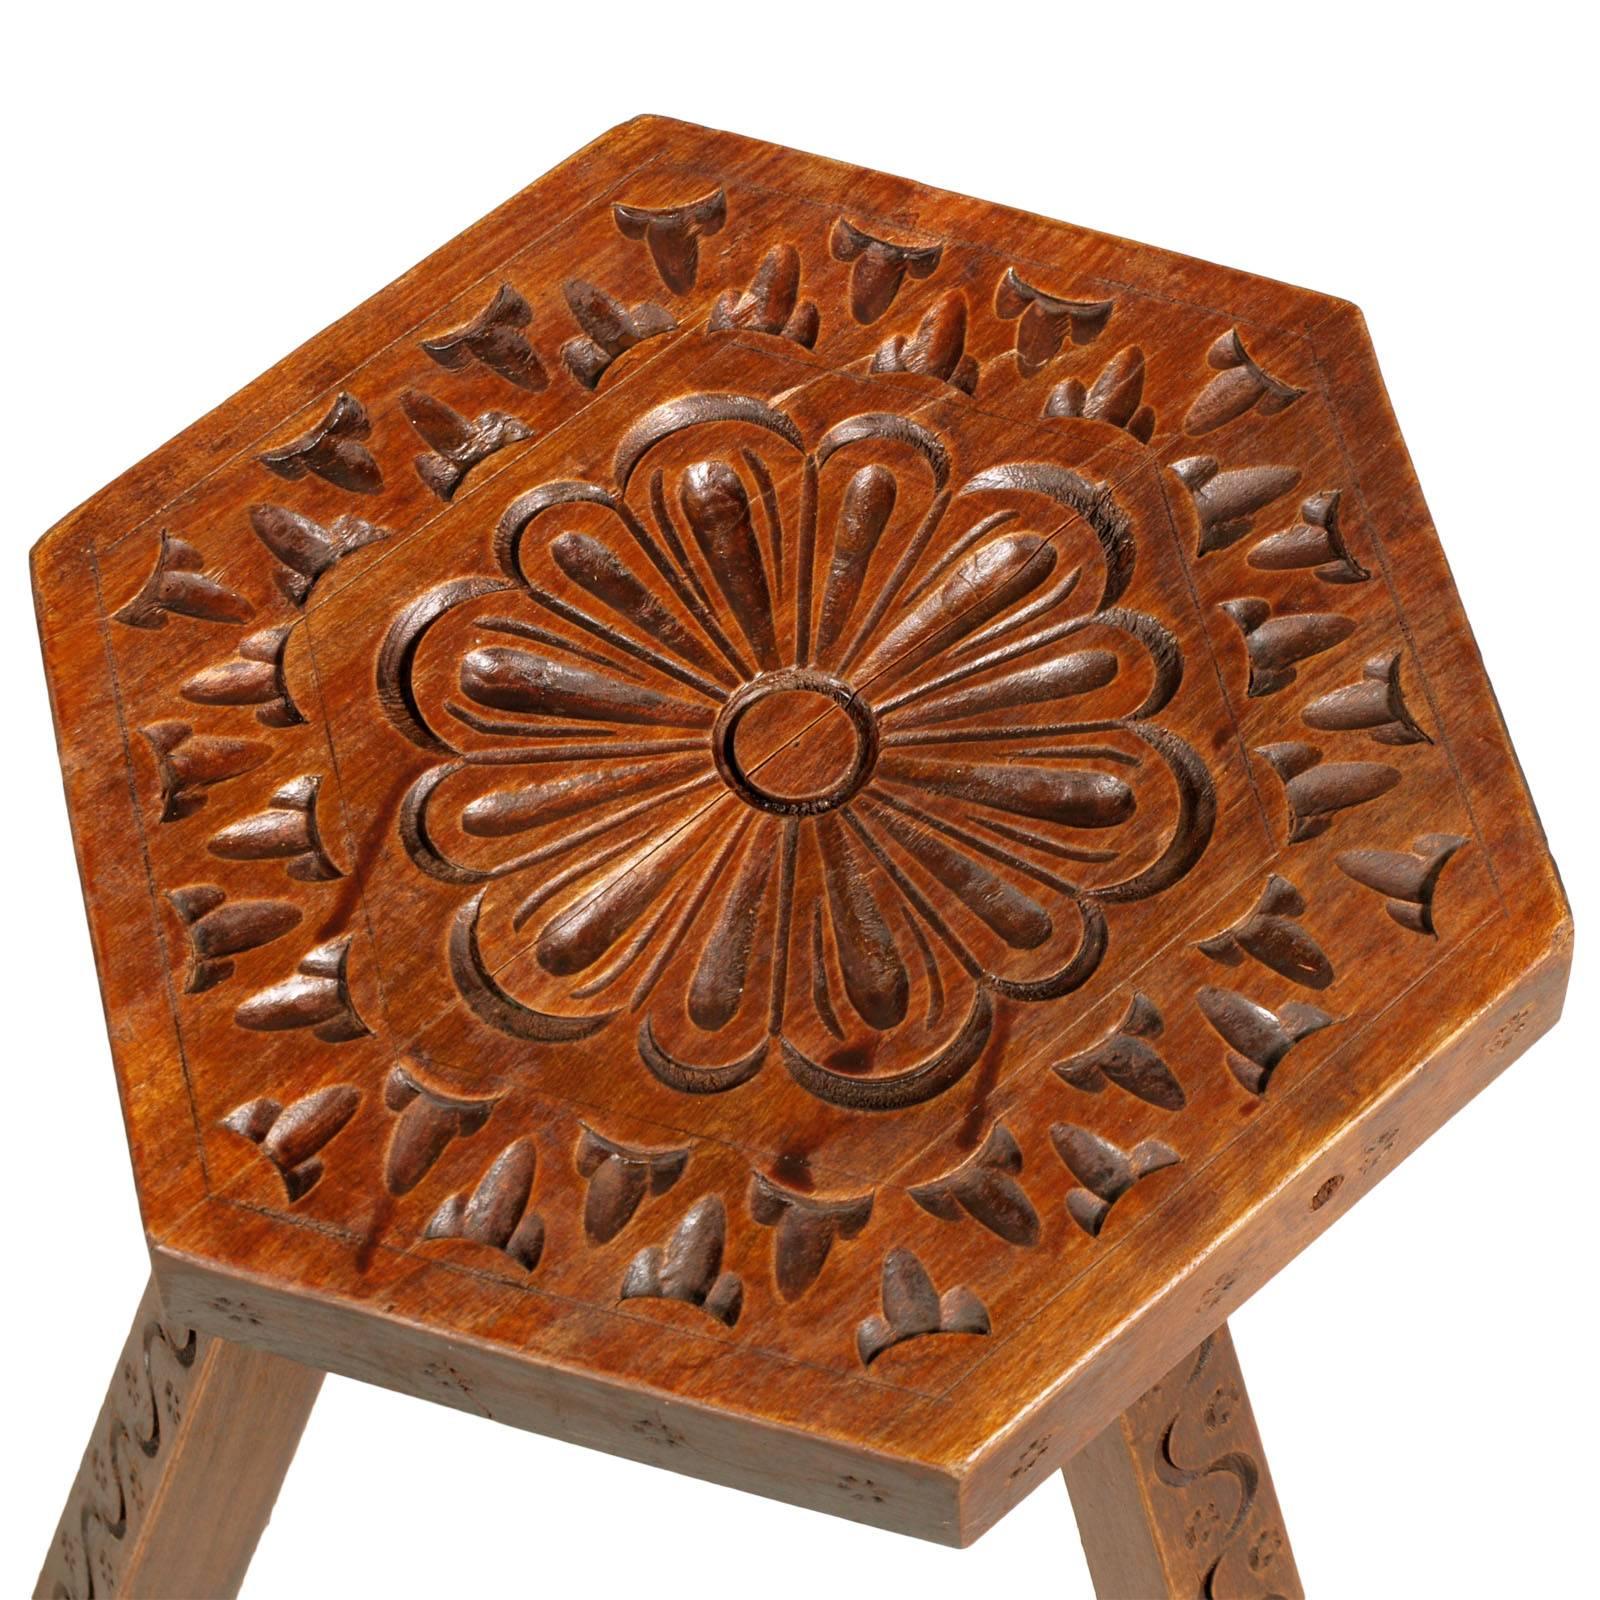 1927  Italian hexagonal country stool, signed 1927 Cortina, richly carved chestnut wood, polished to wax.

Measures cm: Height 44, diameter 31.